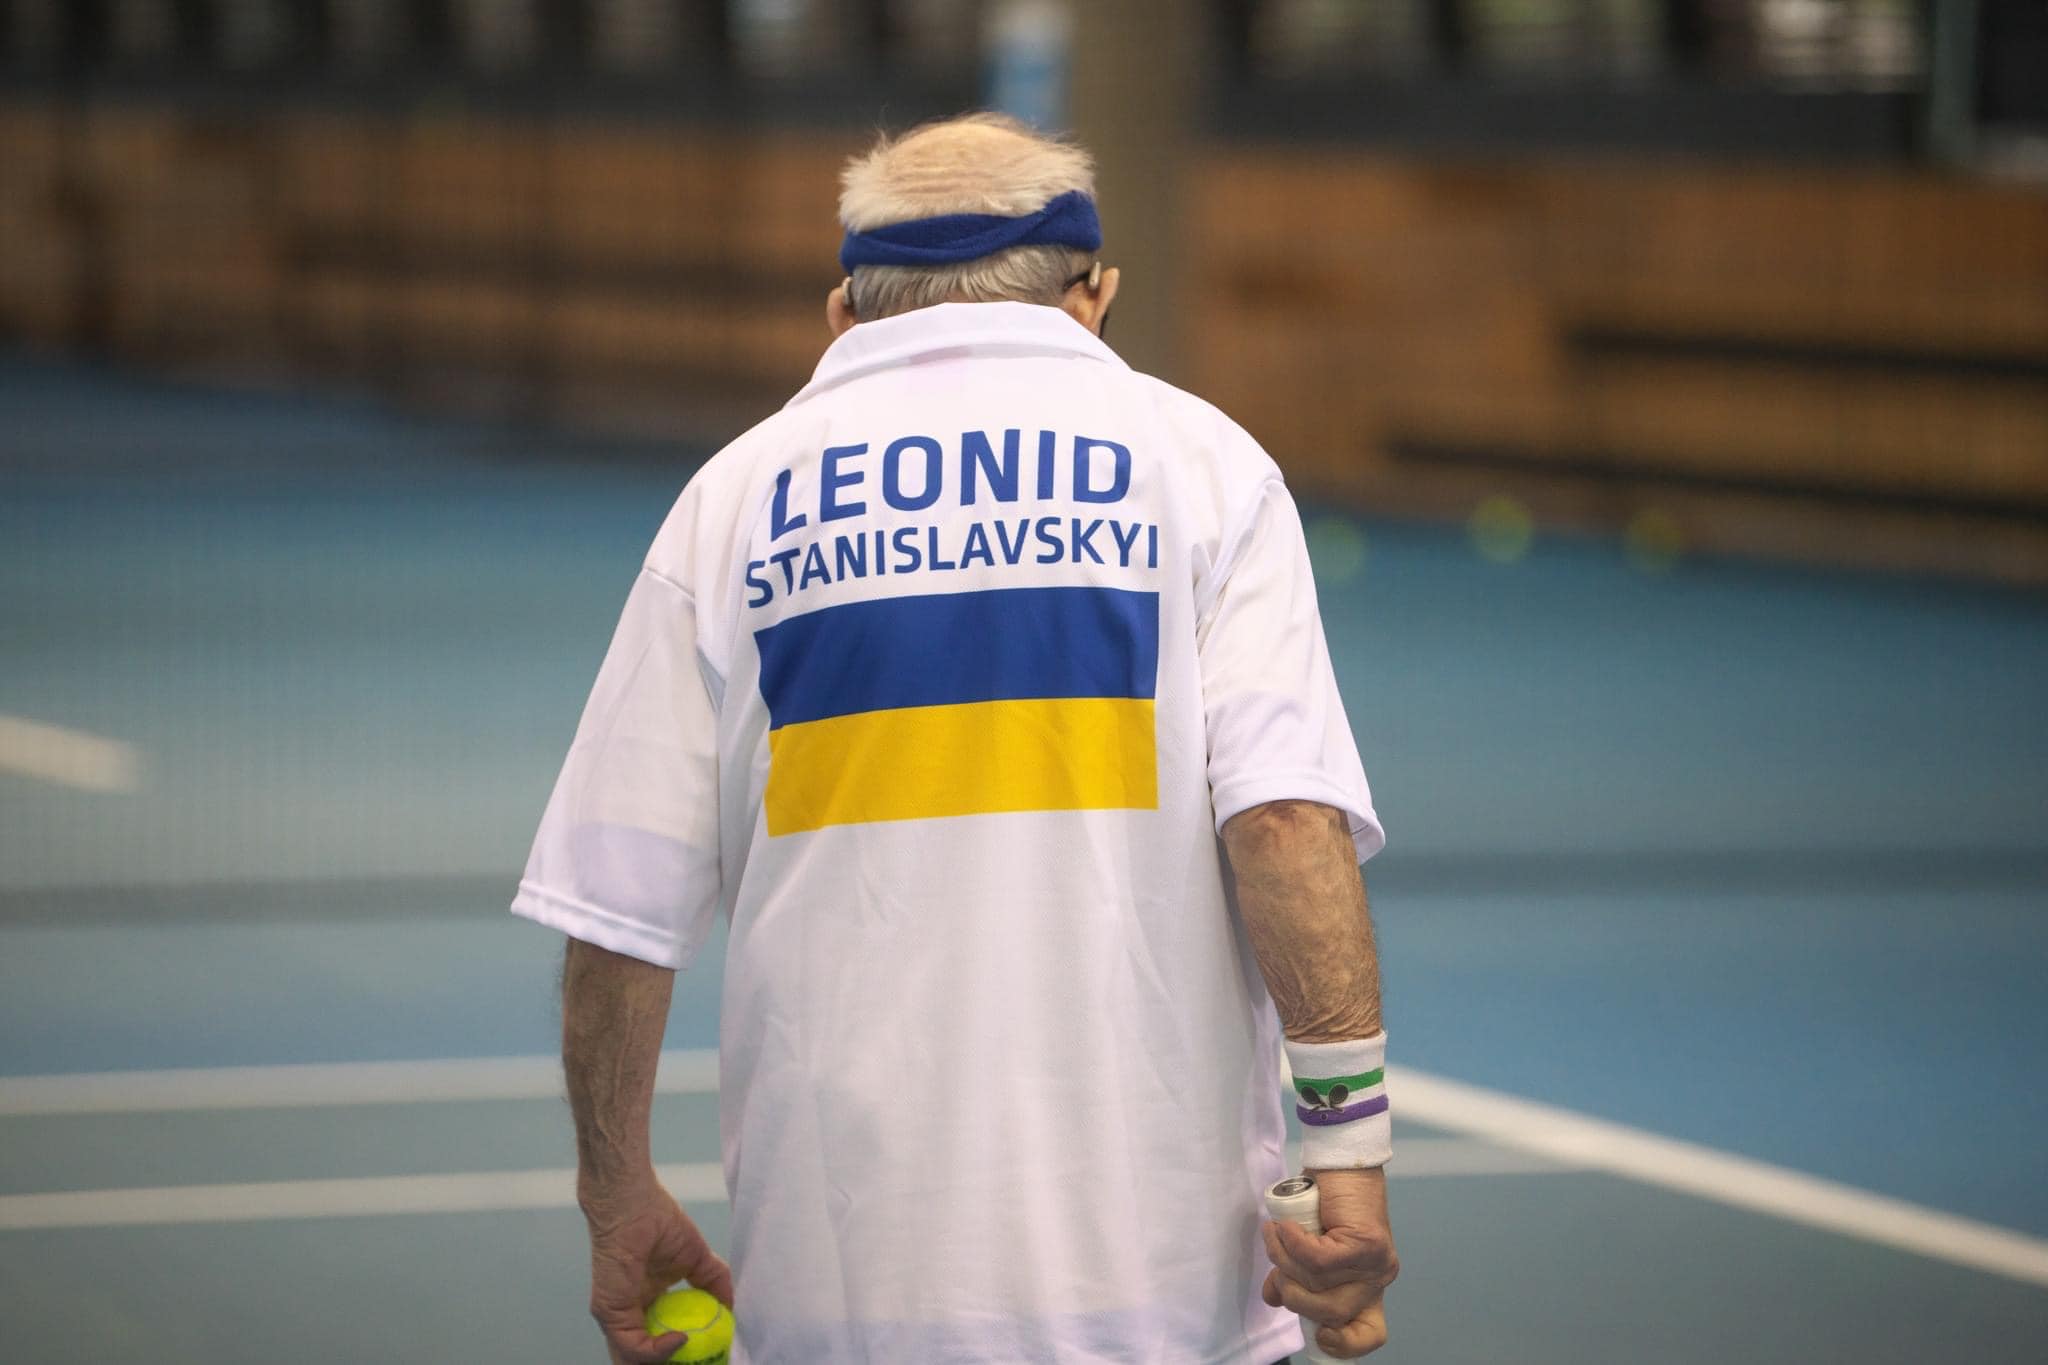 98-year-old tennis player from Kharkiv played at the Australian Open in support of Ukraine